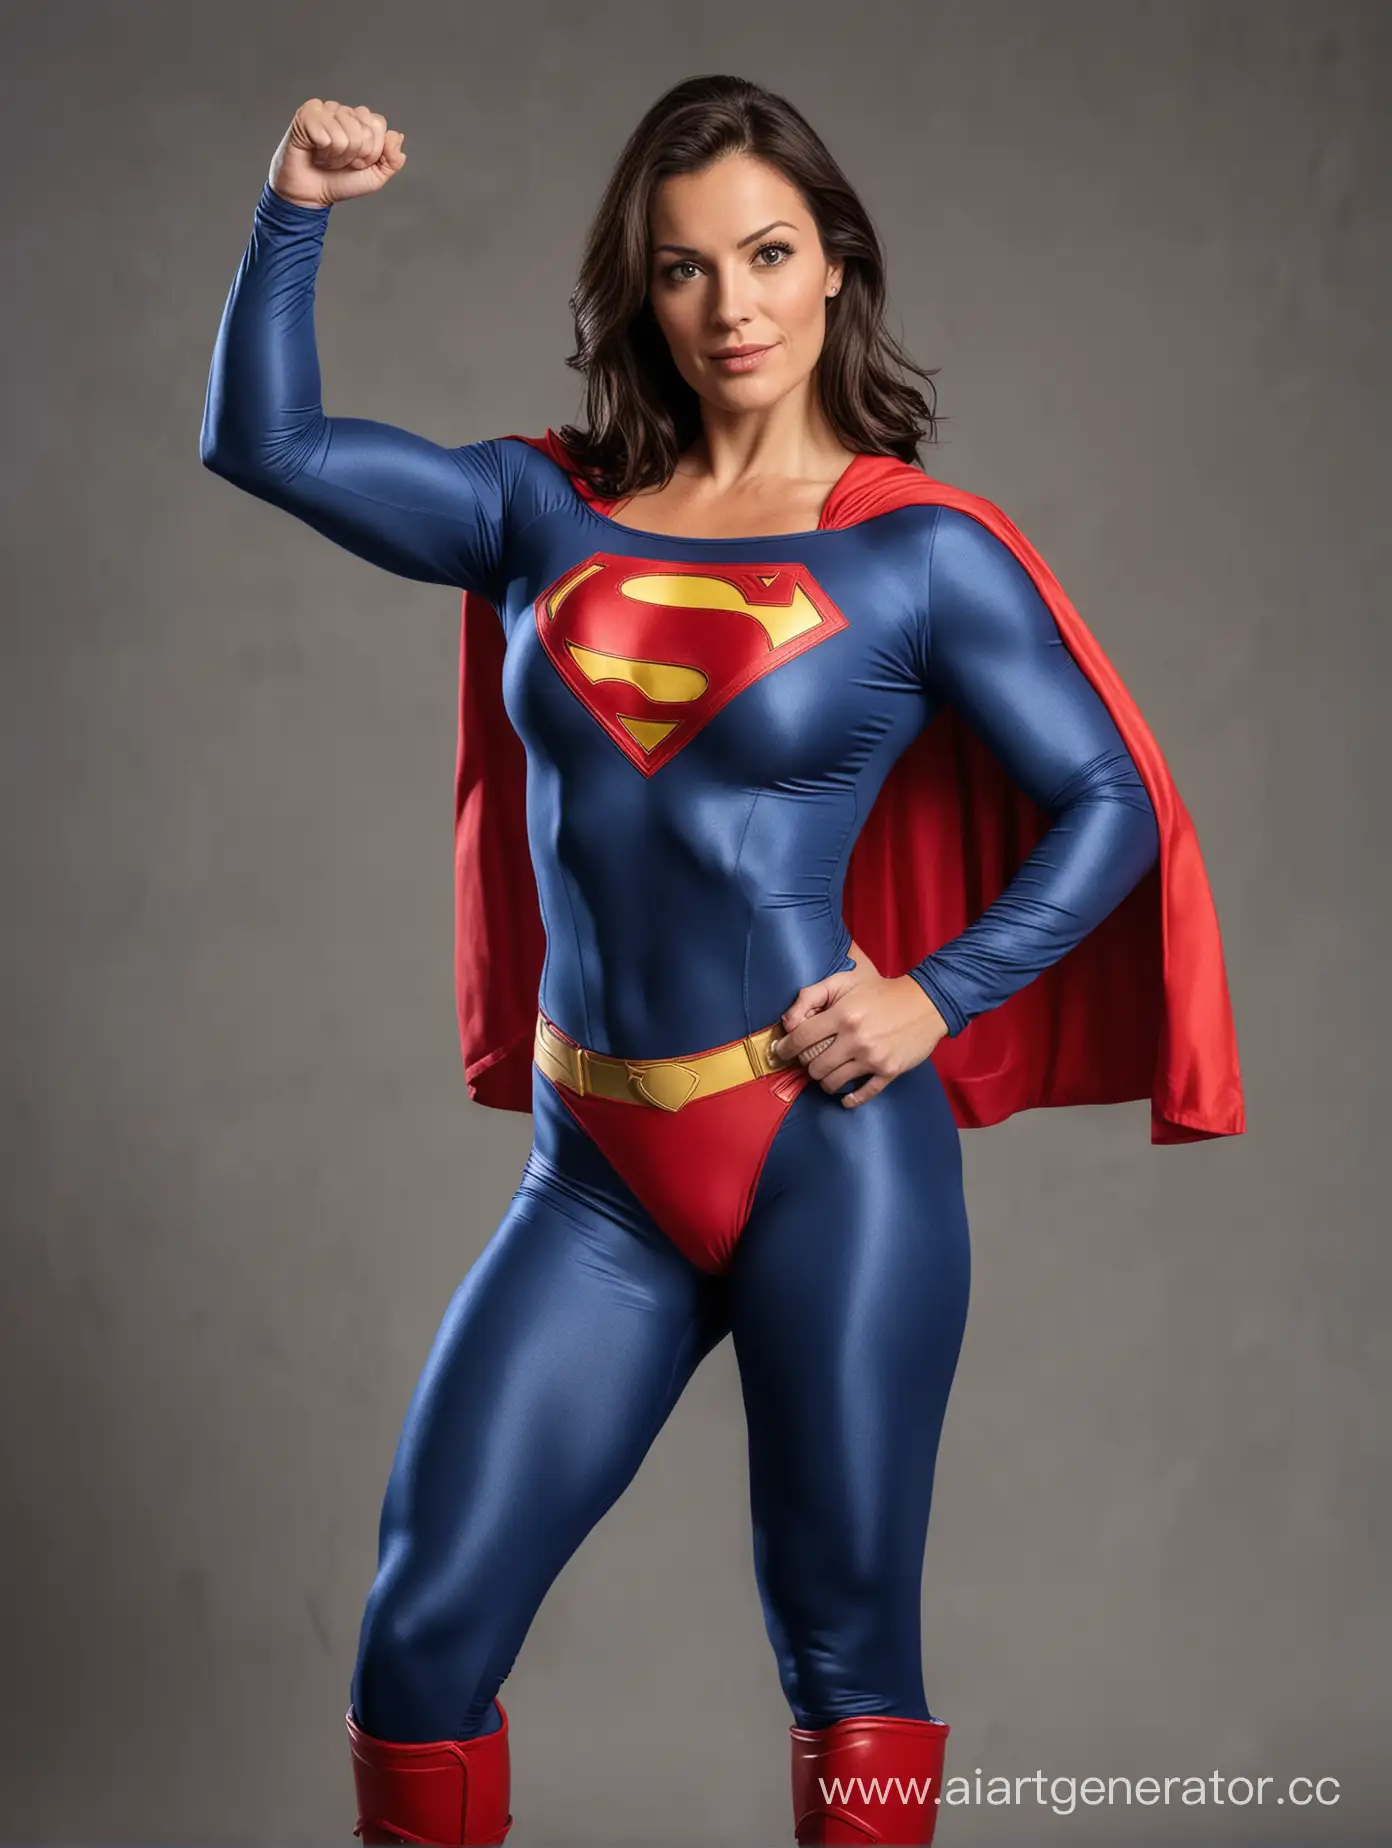 Confident-Woman-Flexing-Muscles-in-Superman-Costume